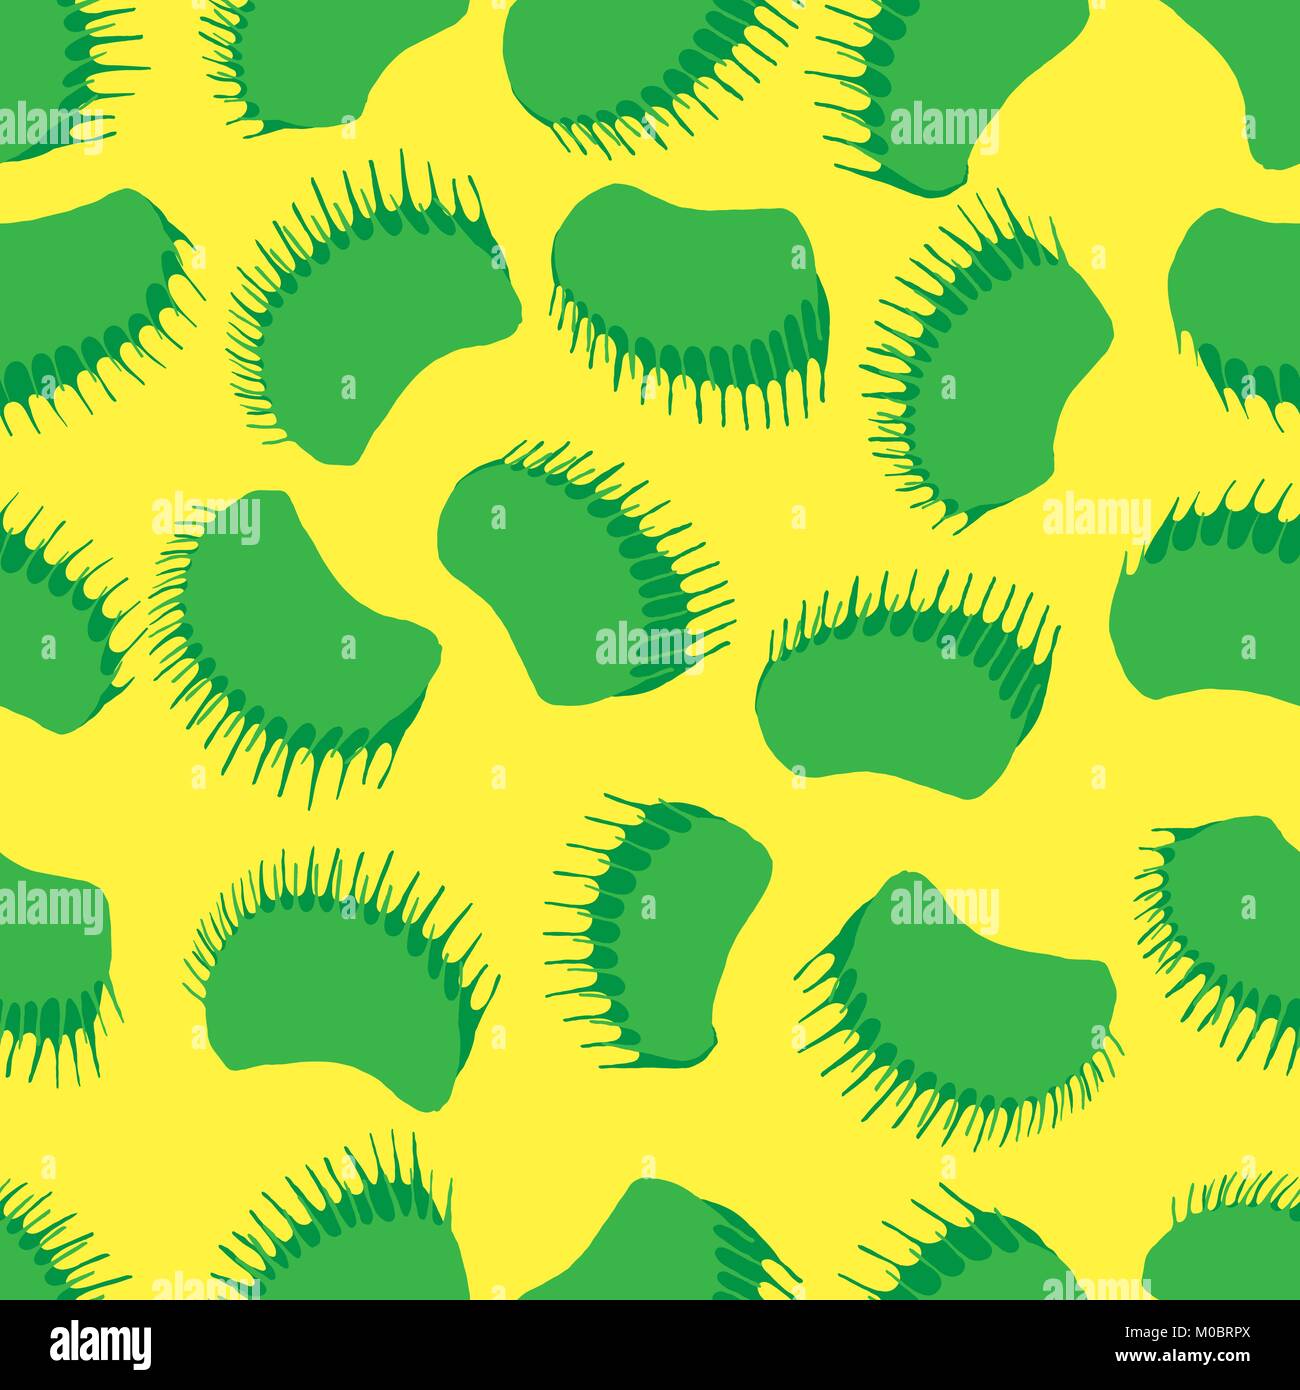 Hand drawn Venus flytrap seamless pattern. Clipping mask used. Stock Vector